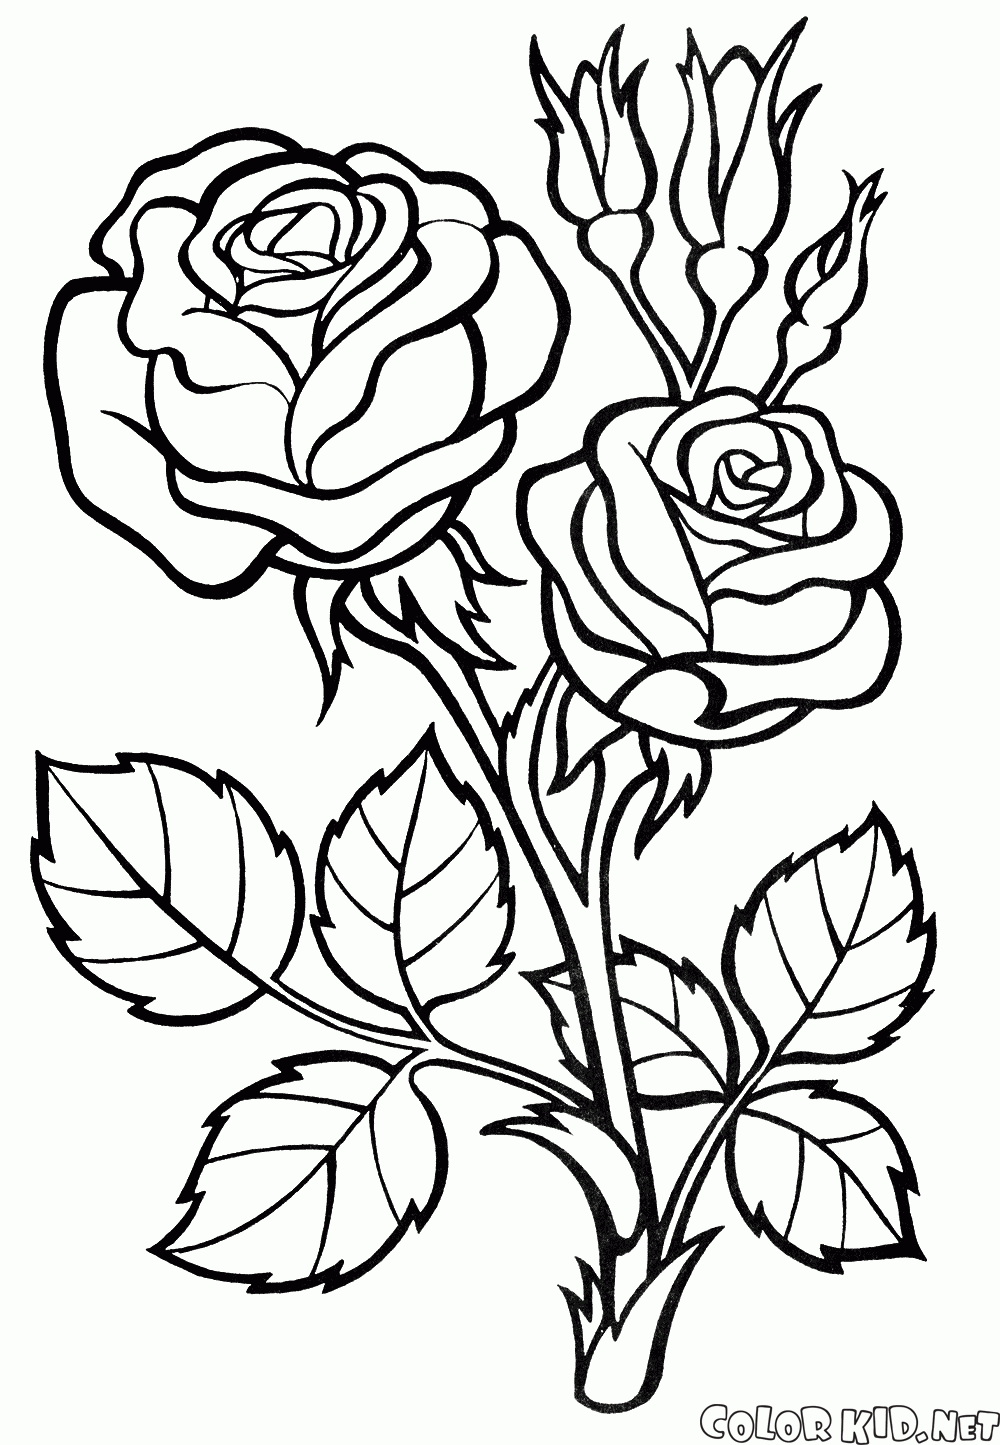 Coloring page - Flowers